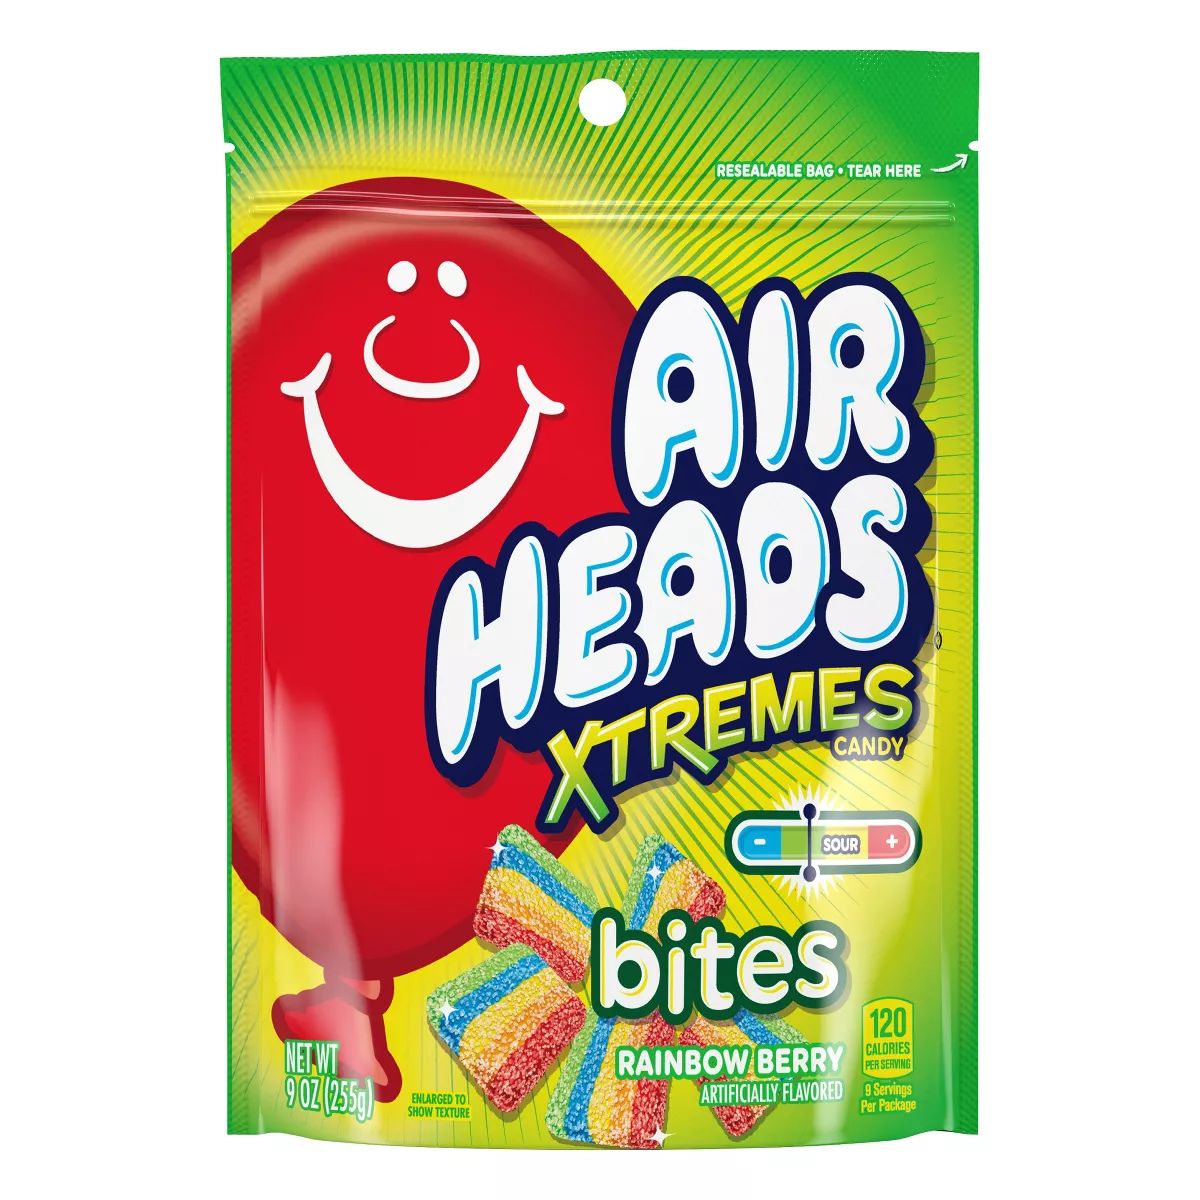 Airheads Xtreme Rainbow Berry Bites Candy - 9oz | Target